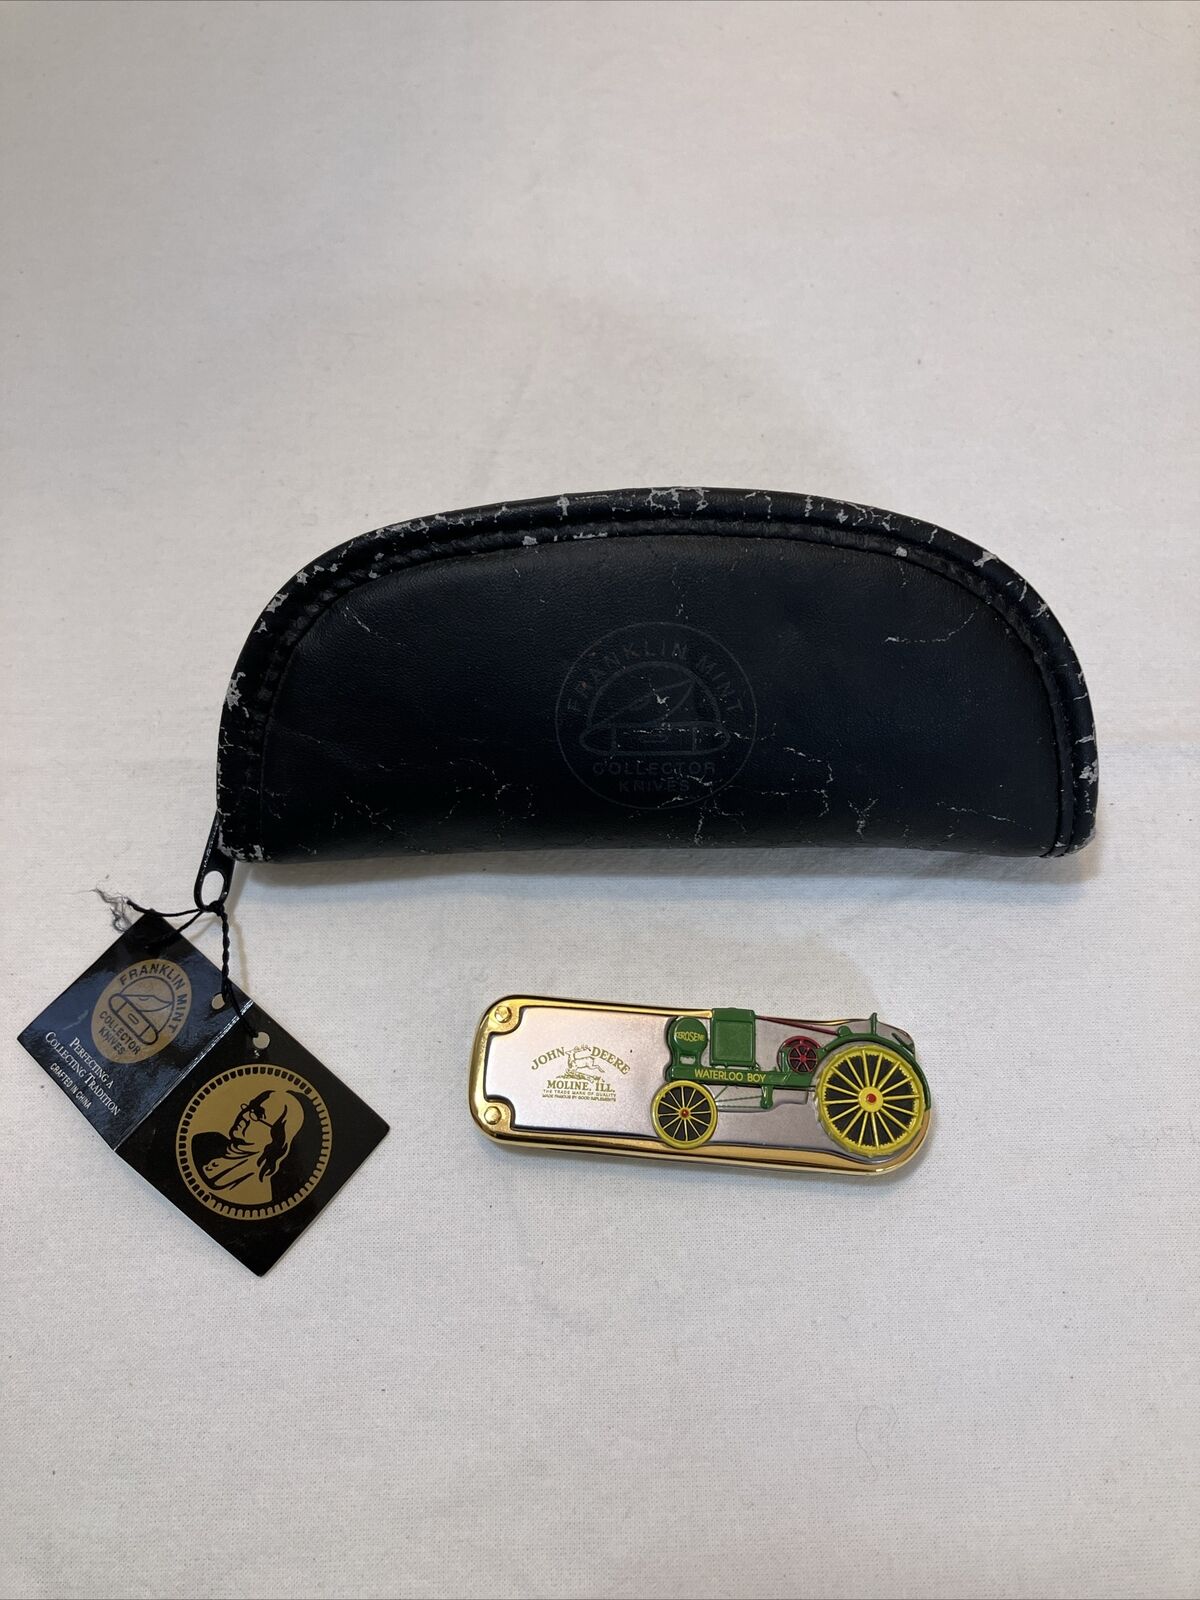 Franklin Mint Waterloo Boy Engine Pocket Knife Collectible